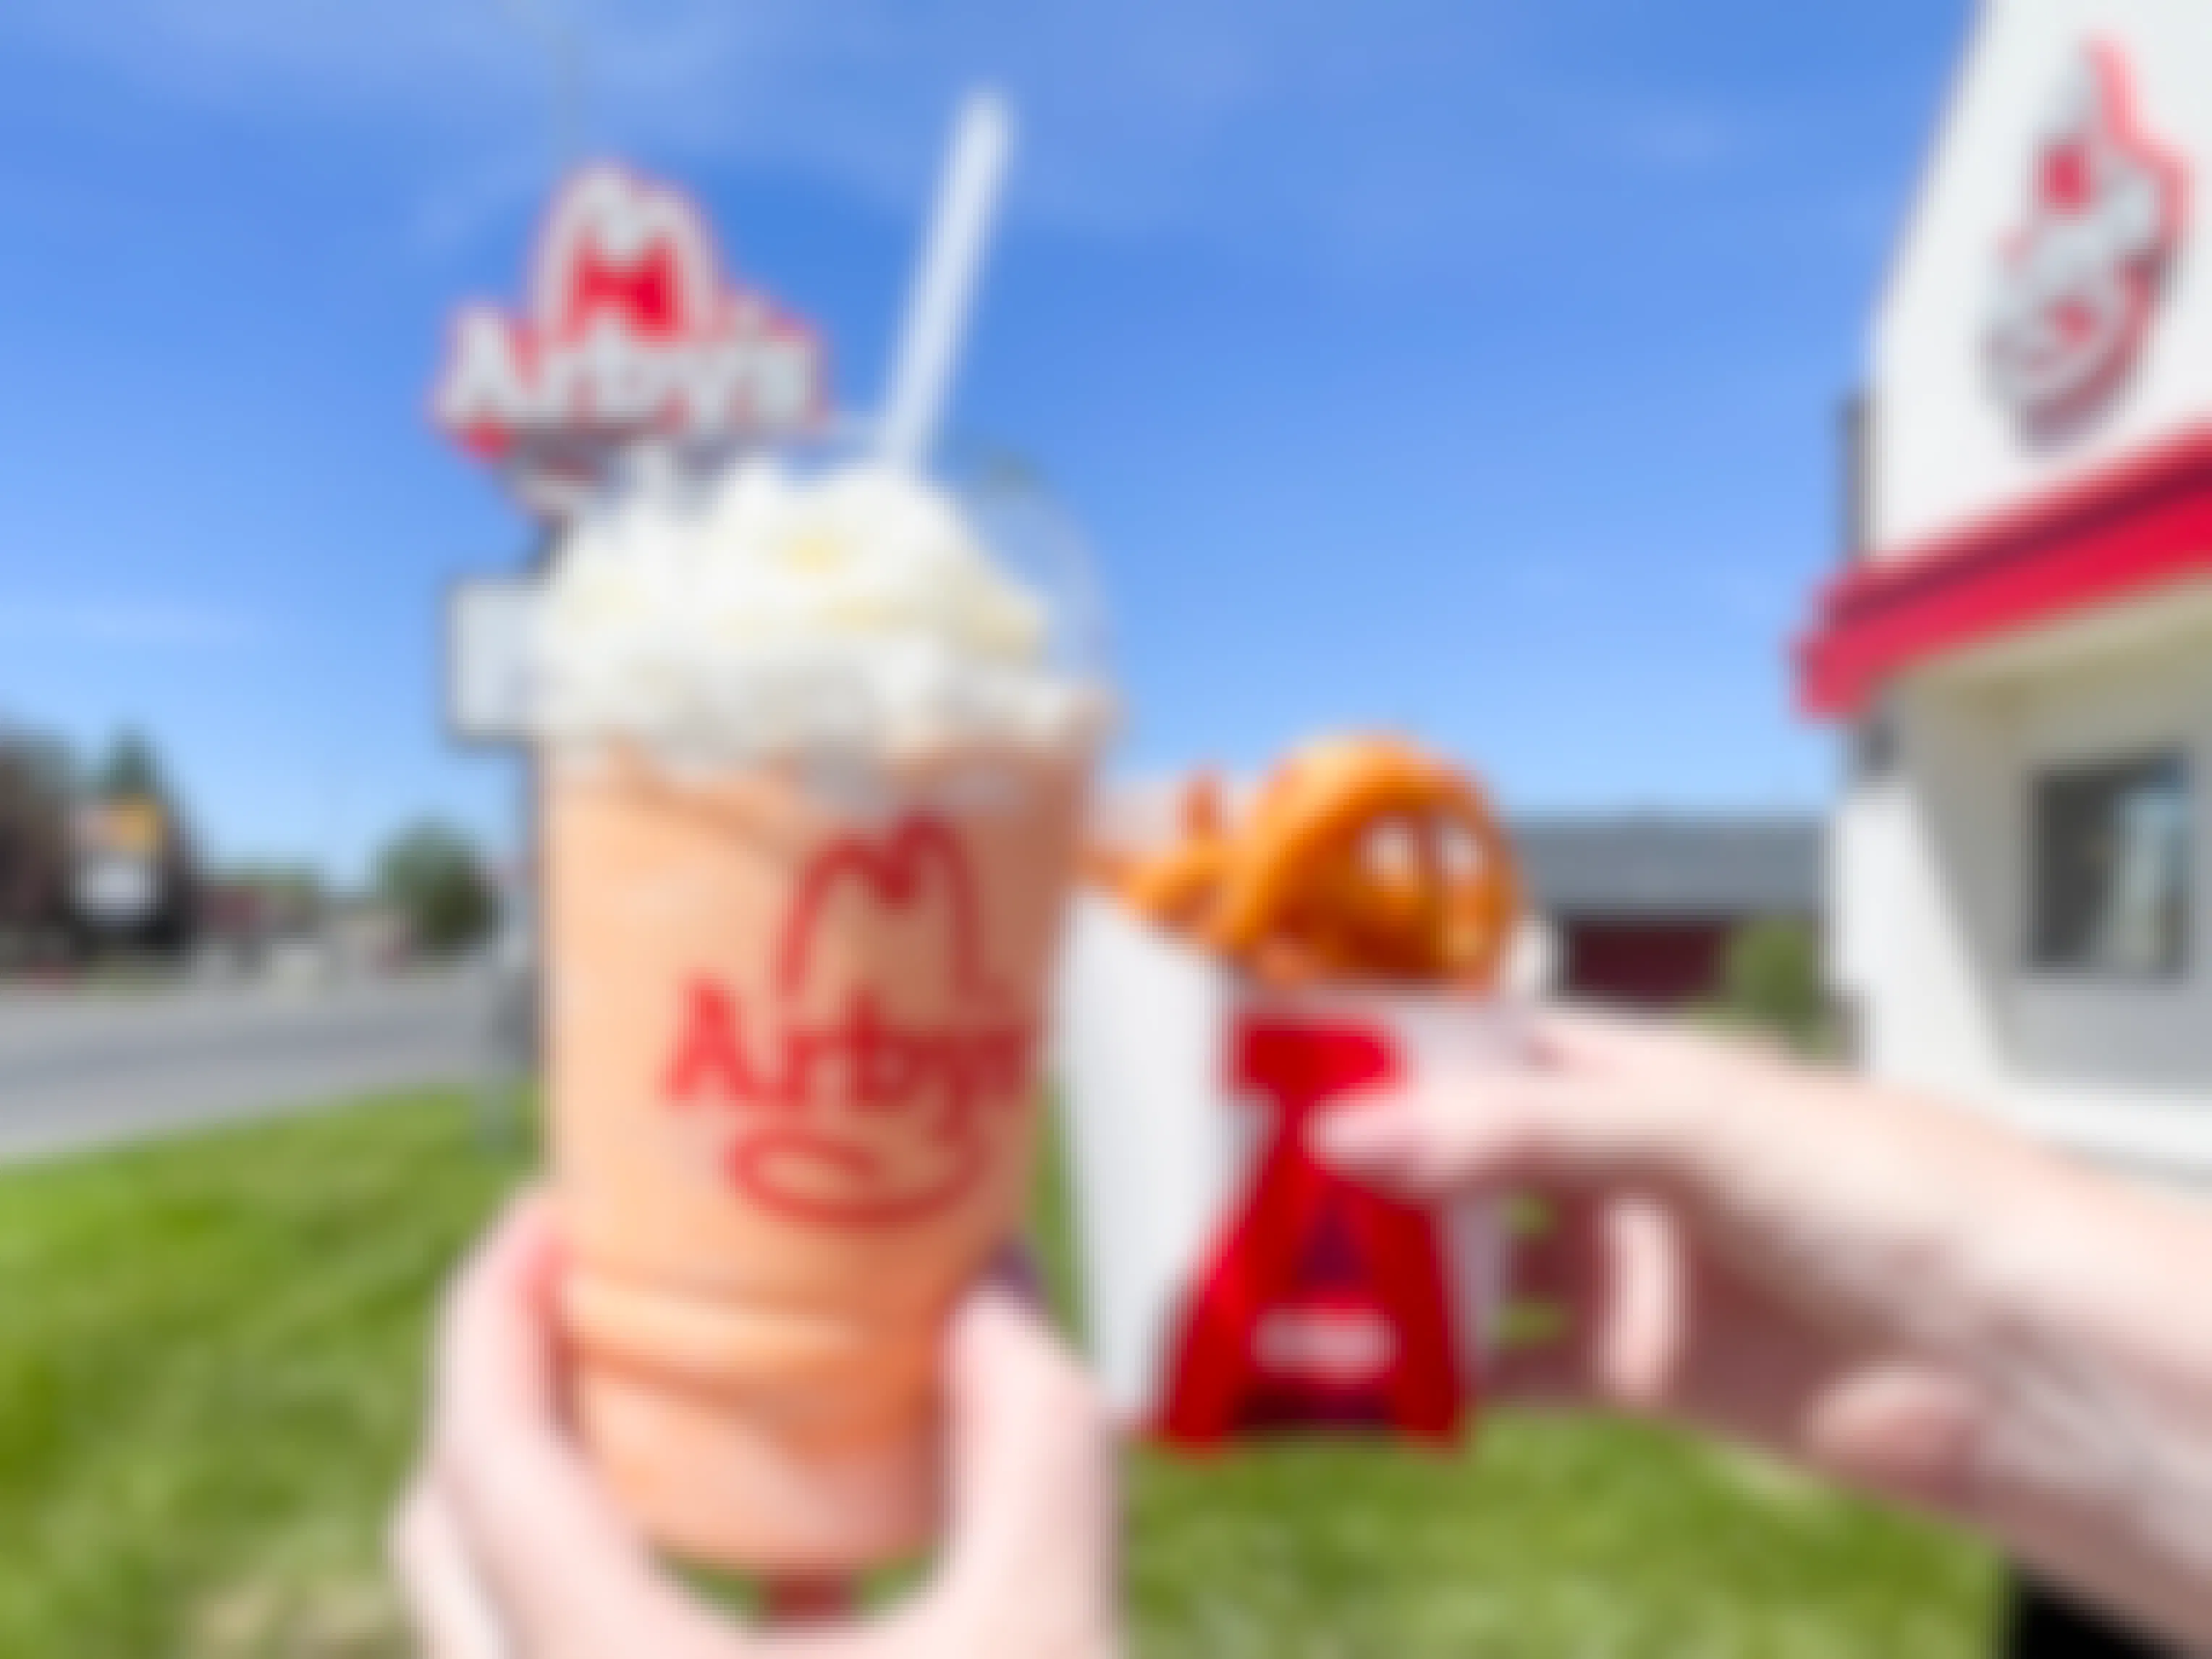 a shake and fries being held outside arbys 